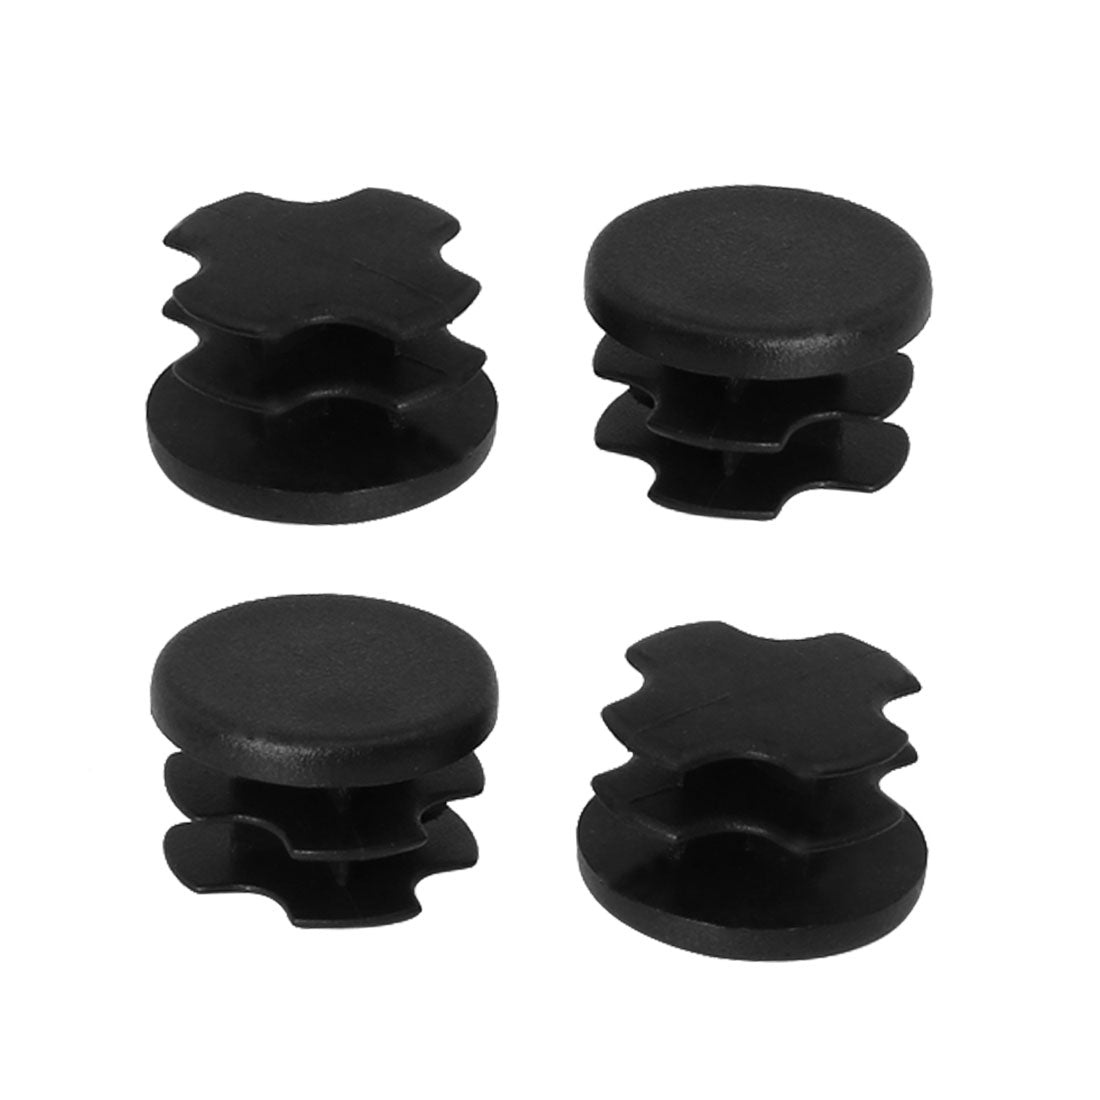 Uxcell Uxcell 3/4" 19mm OD Plastic Tube Inserts Pipe End Covers Caps 4pcs, 0.63"-0.71" Inner Dia, for Furniture Chair Table Legs